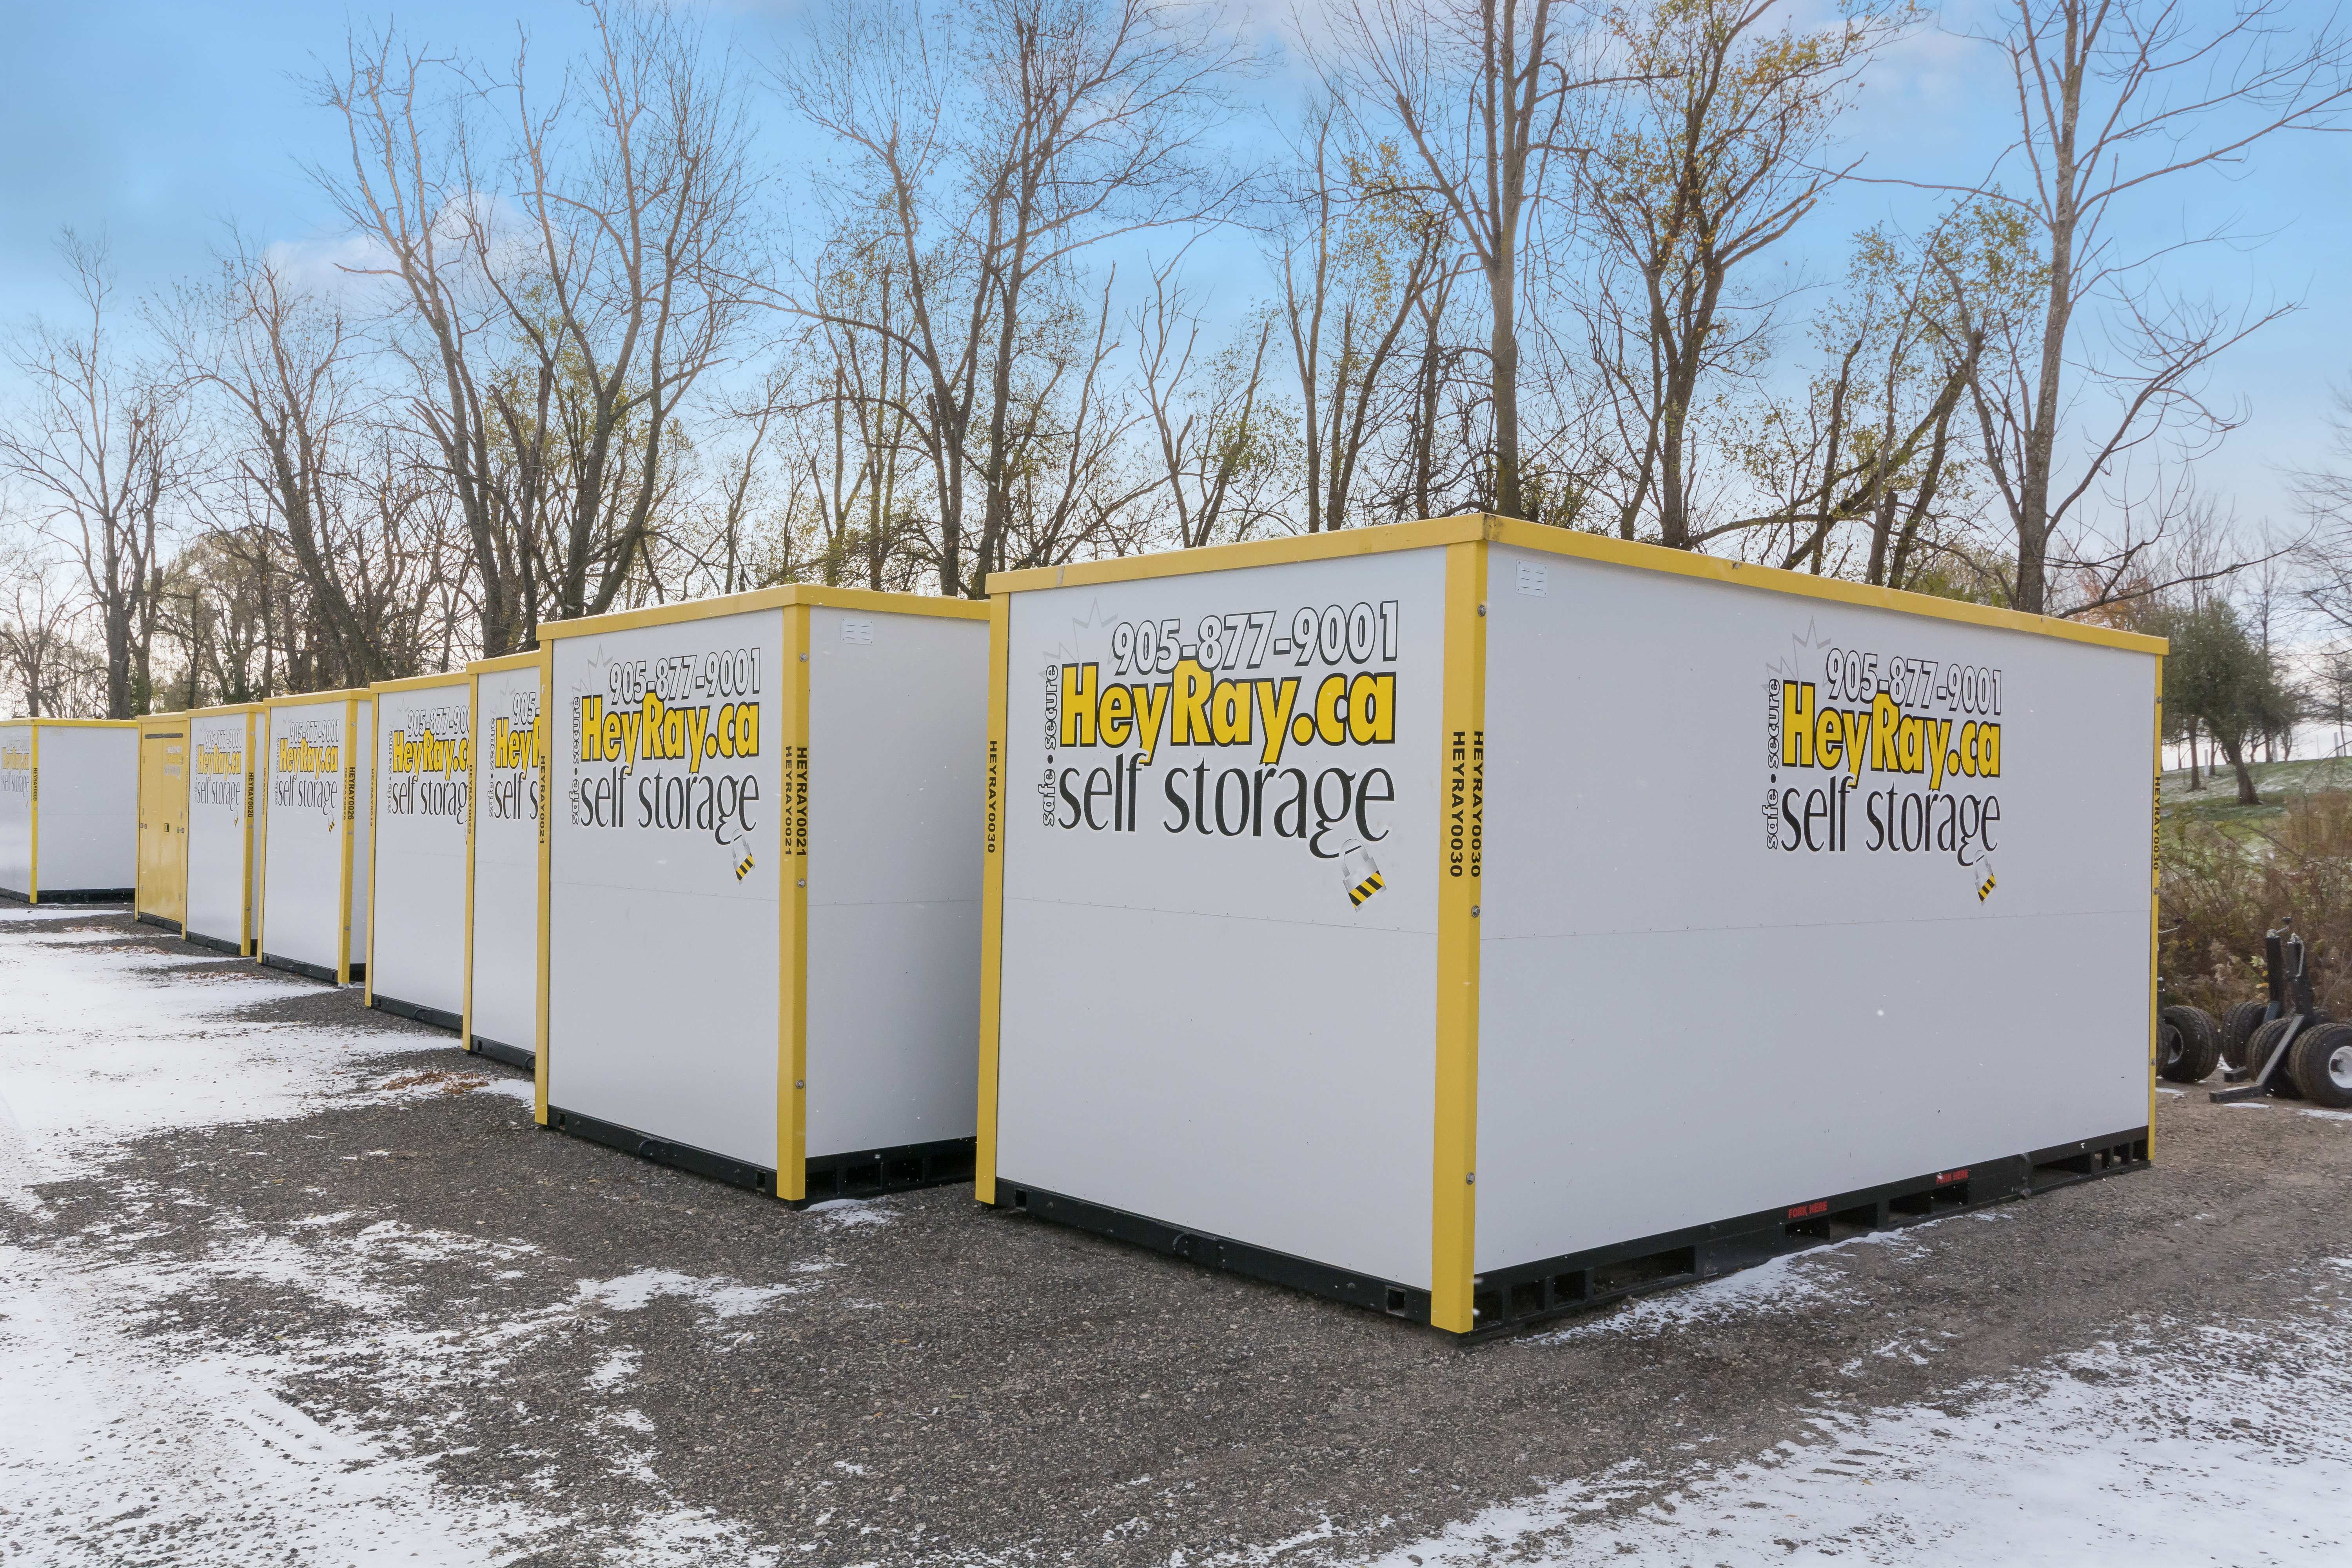 Line up of our portable storage units